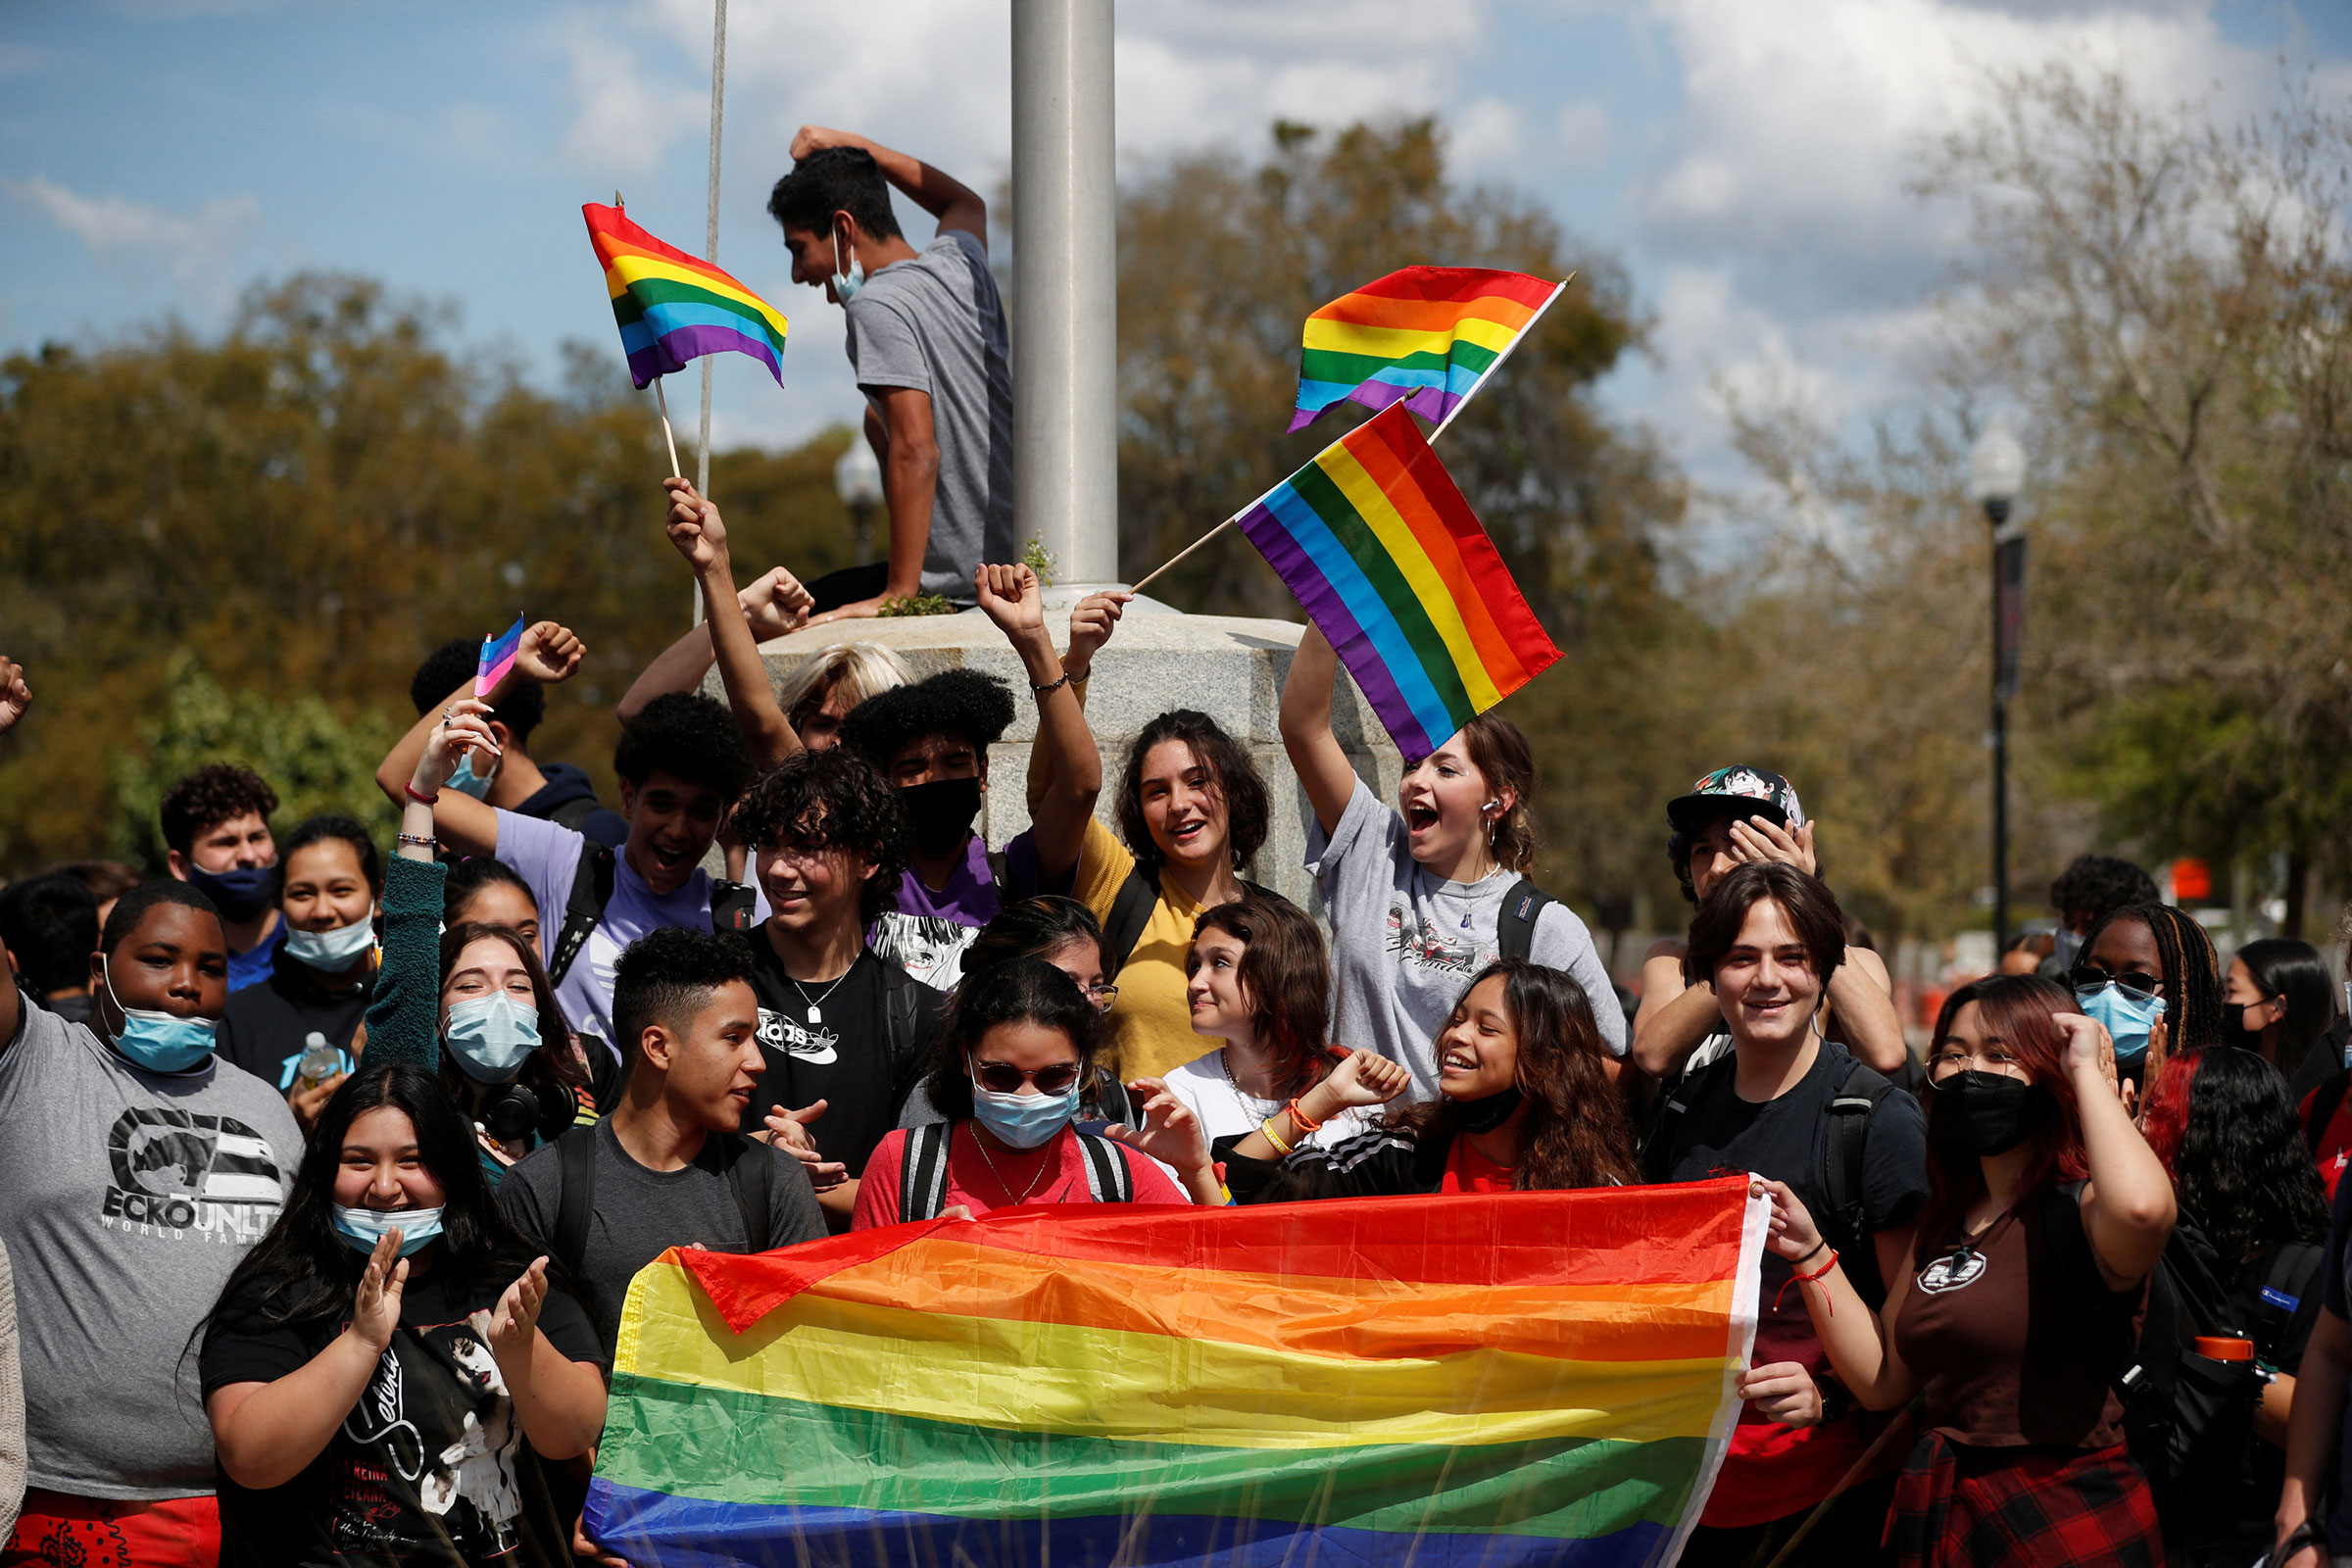 Hillsborough High School students protest a Republican-backed bill dubbed the "Don't Say Gay" that would prohibit classroom discussion of sexual orientation and gender identity, in Tampa, Fla., on March 3, 2022. (Octavio Jones—Reuters/Redux)